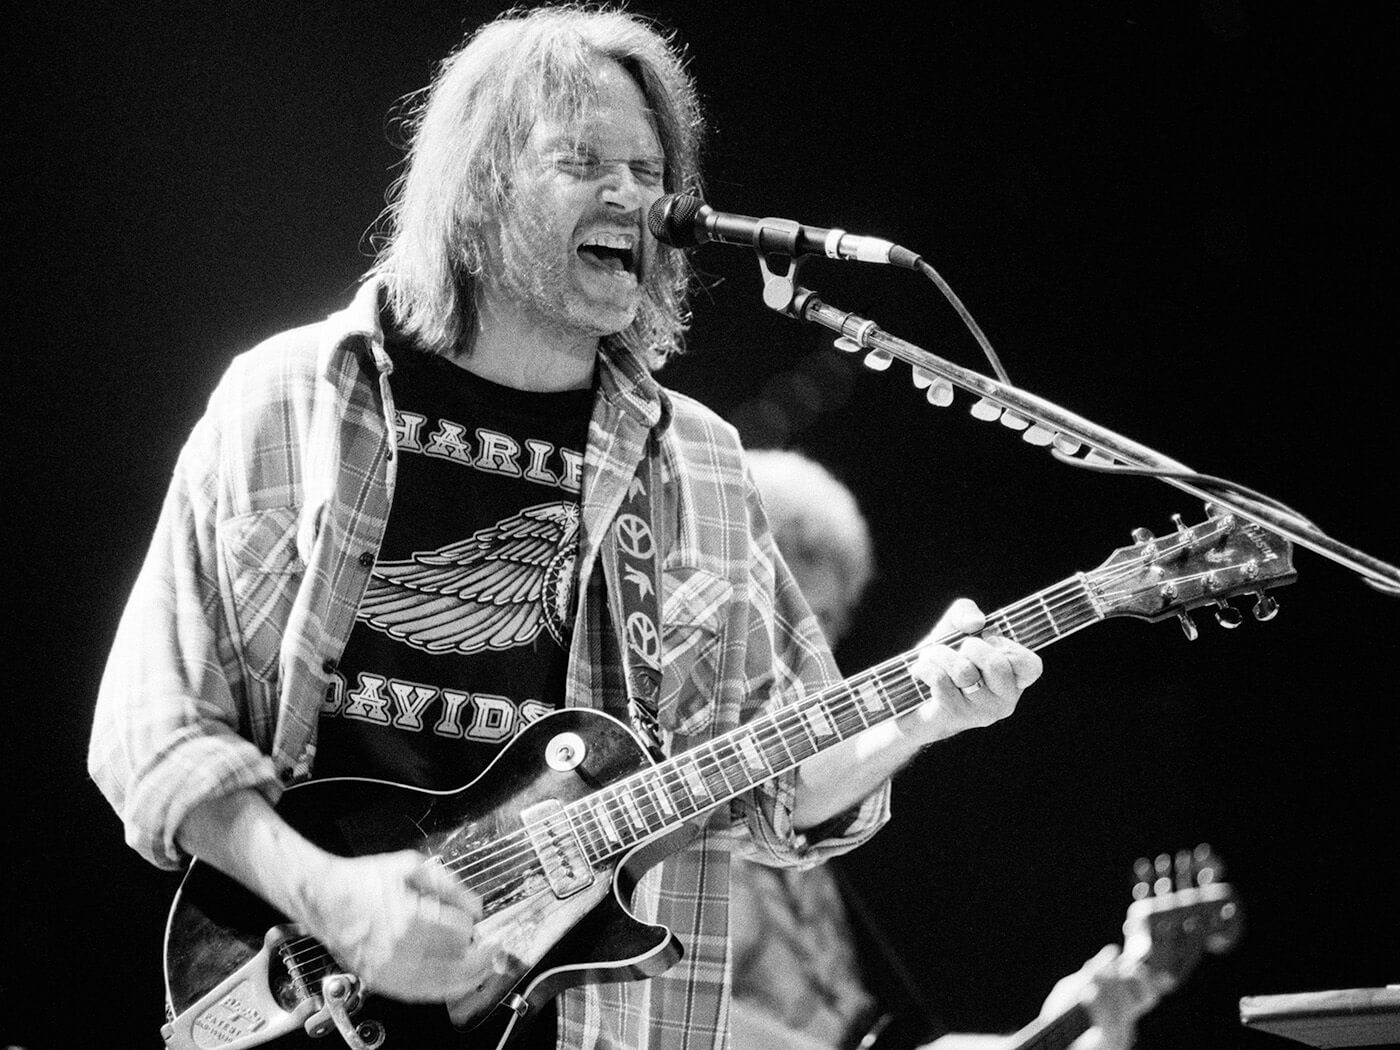 Neil Young, guitar and vocals, performs on July 5th 1993 at Ahoy in Rotterdam, Netherlands.